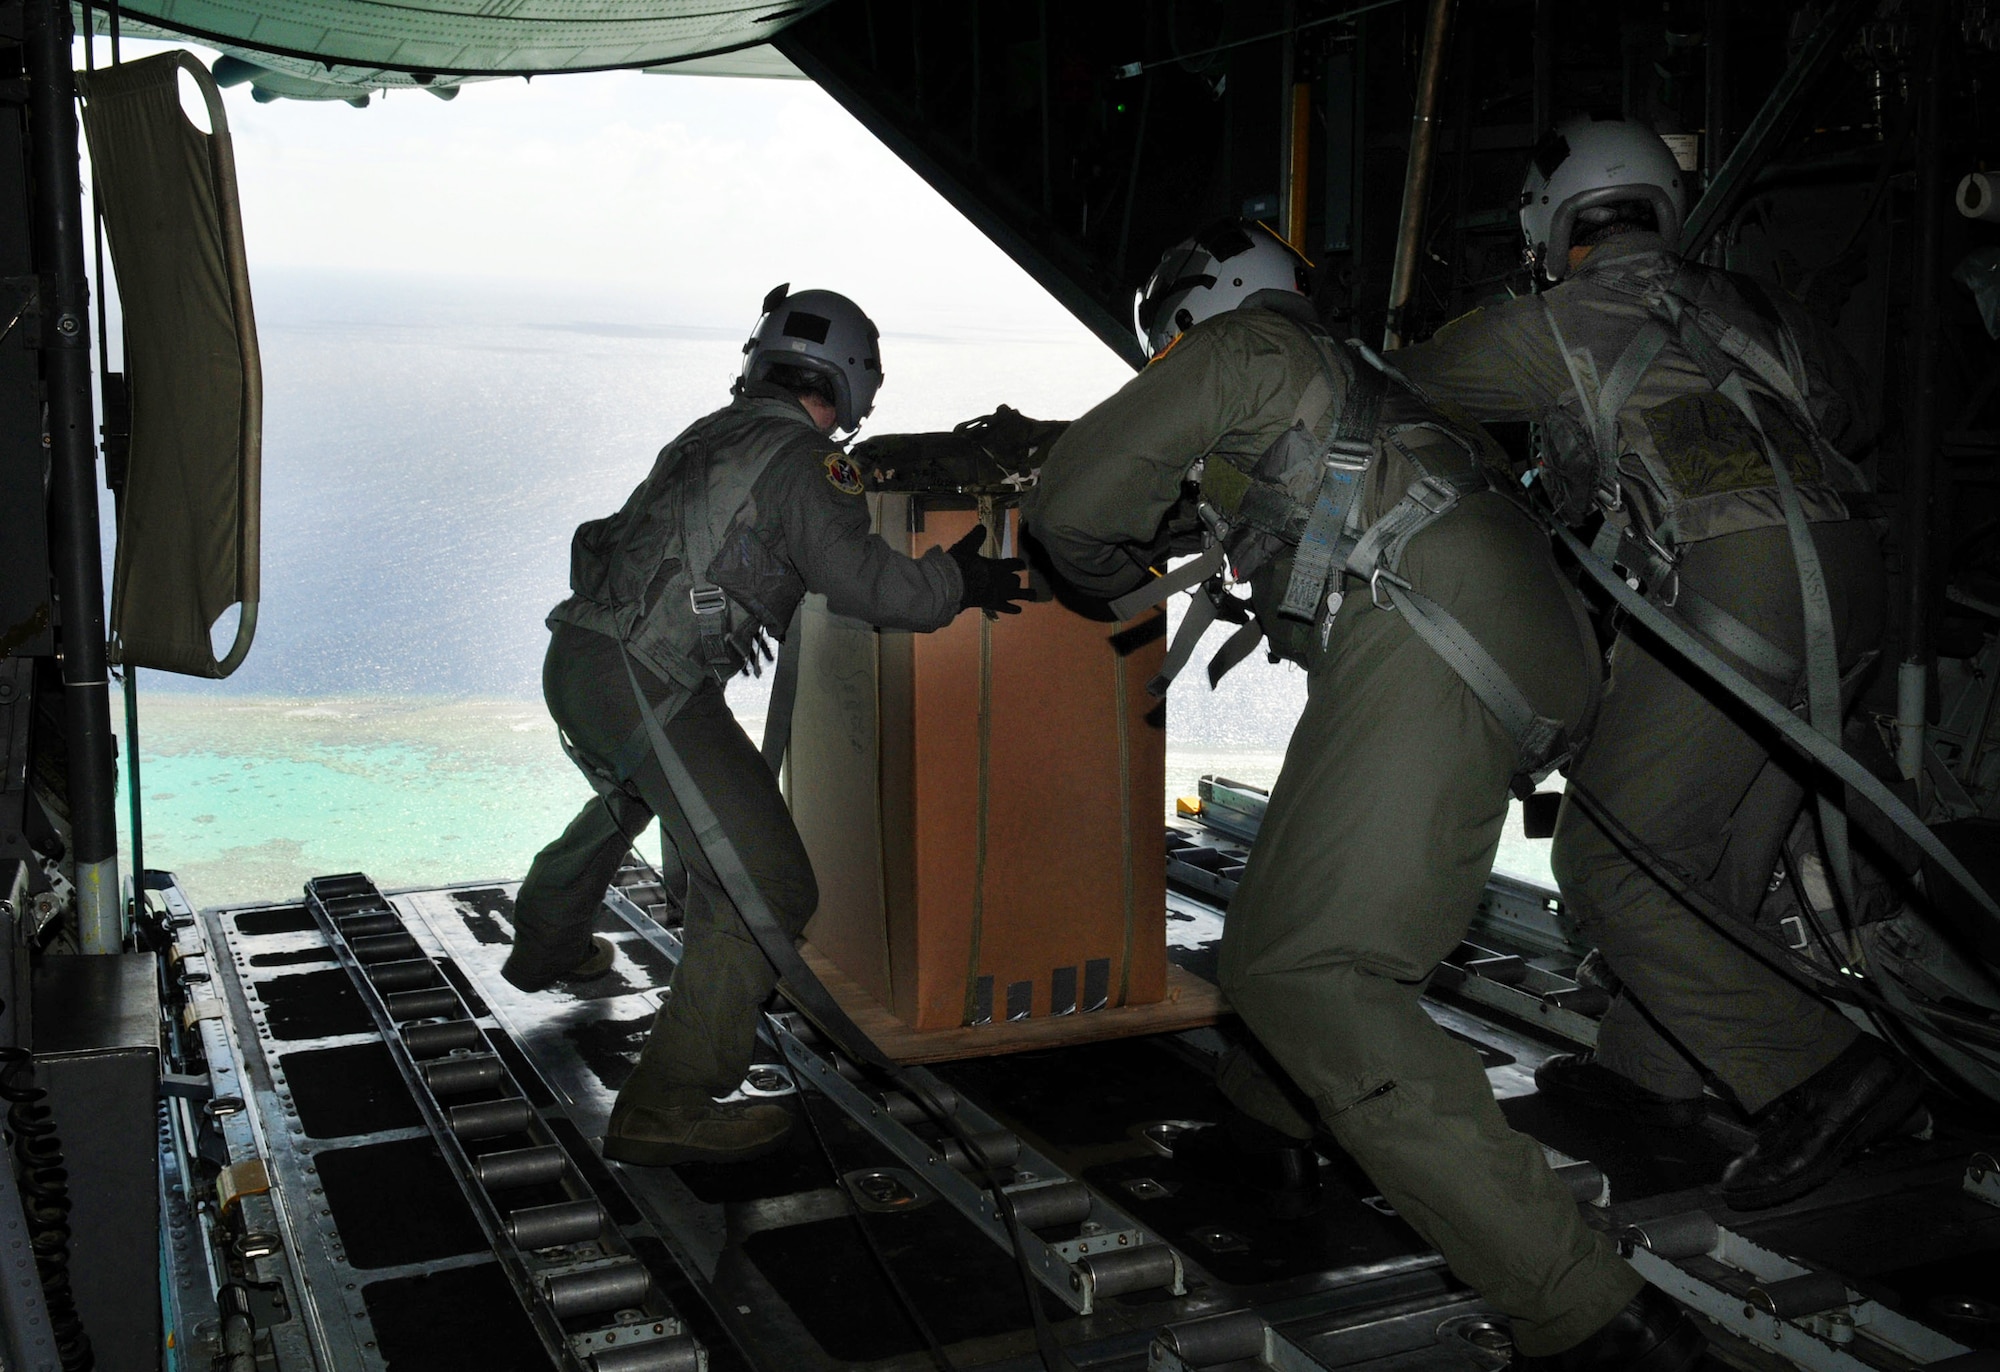 Airman from the 36th Airlift Squadron at Yokota Air Base, Japan, prepare to drop a package over a remote island near Chuuk Dec. 17, 2009. Operation Christmas Drop is a non-profit organization sponsored by volunteers from Andersen Air Force Base and the local Guam community. (U.S. Air Force photo/Airman 1st Class Courtney Witt)